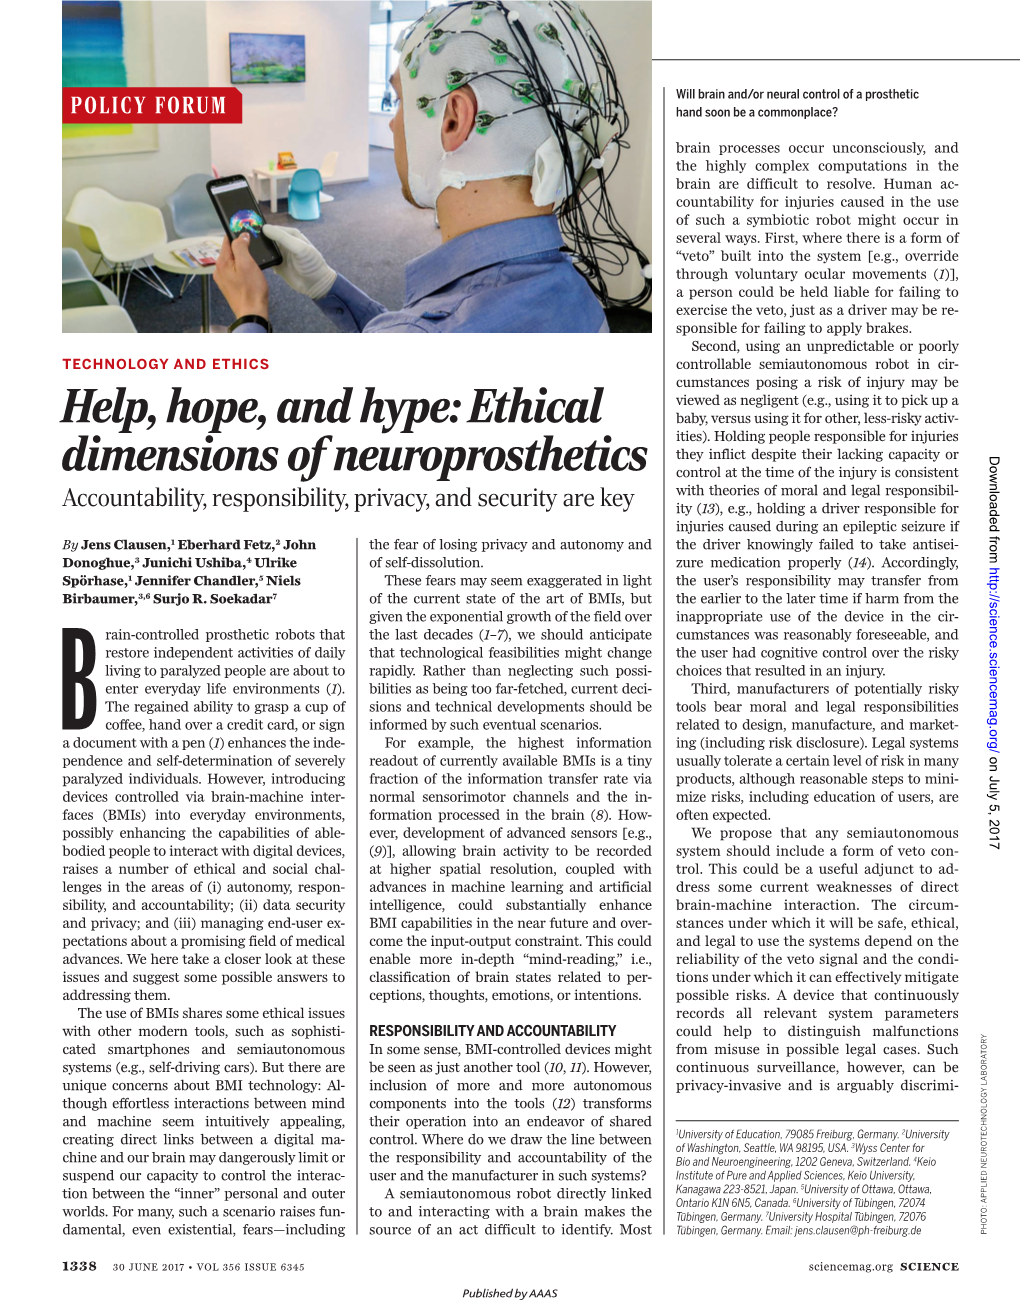 Help, Hope, and Hype: Ethical Dimensions of Neuroprosthetics